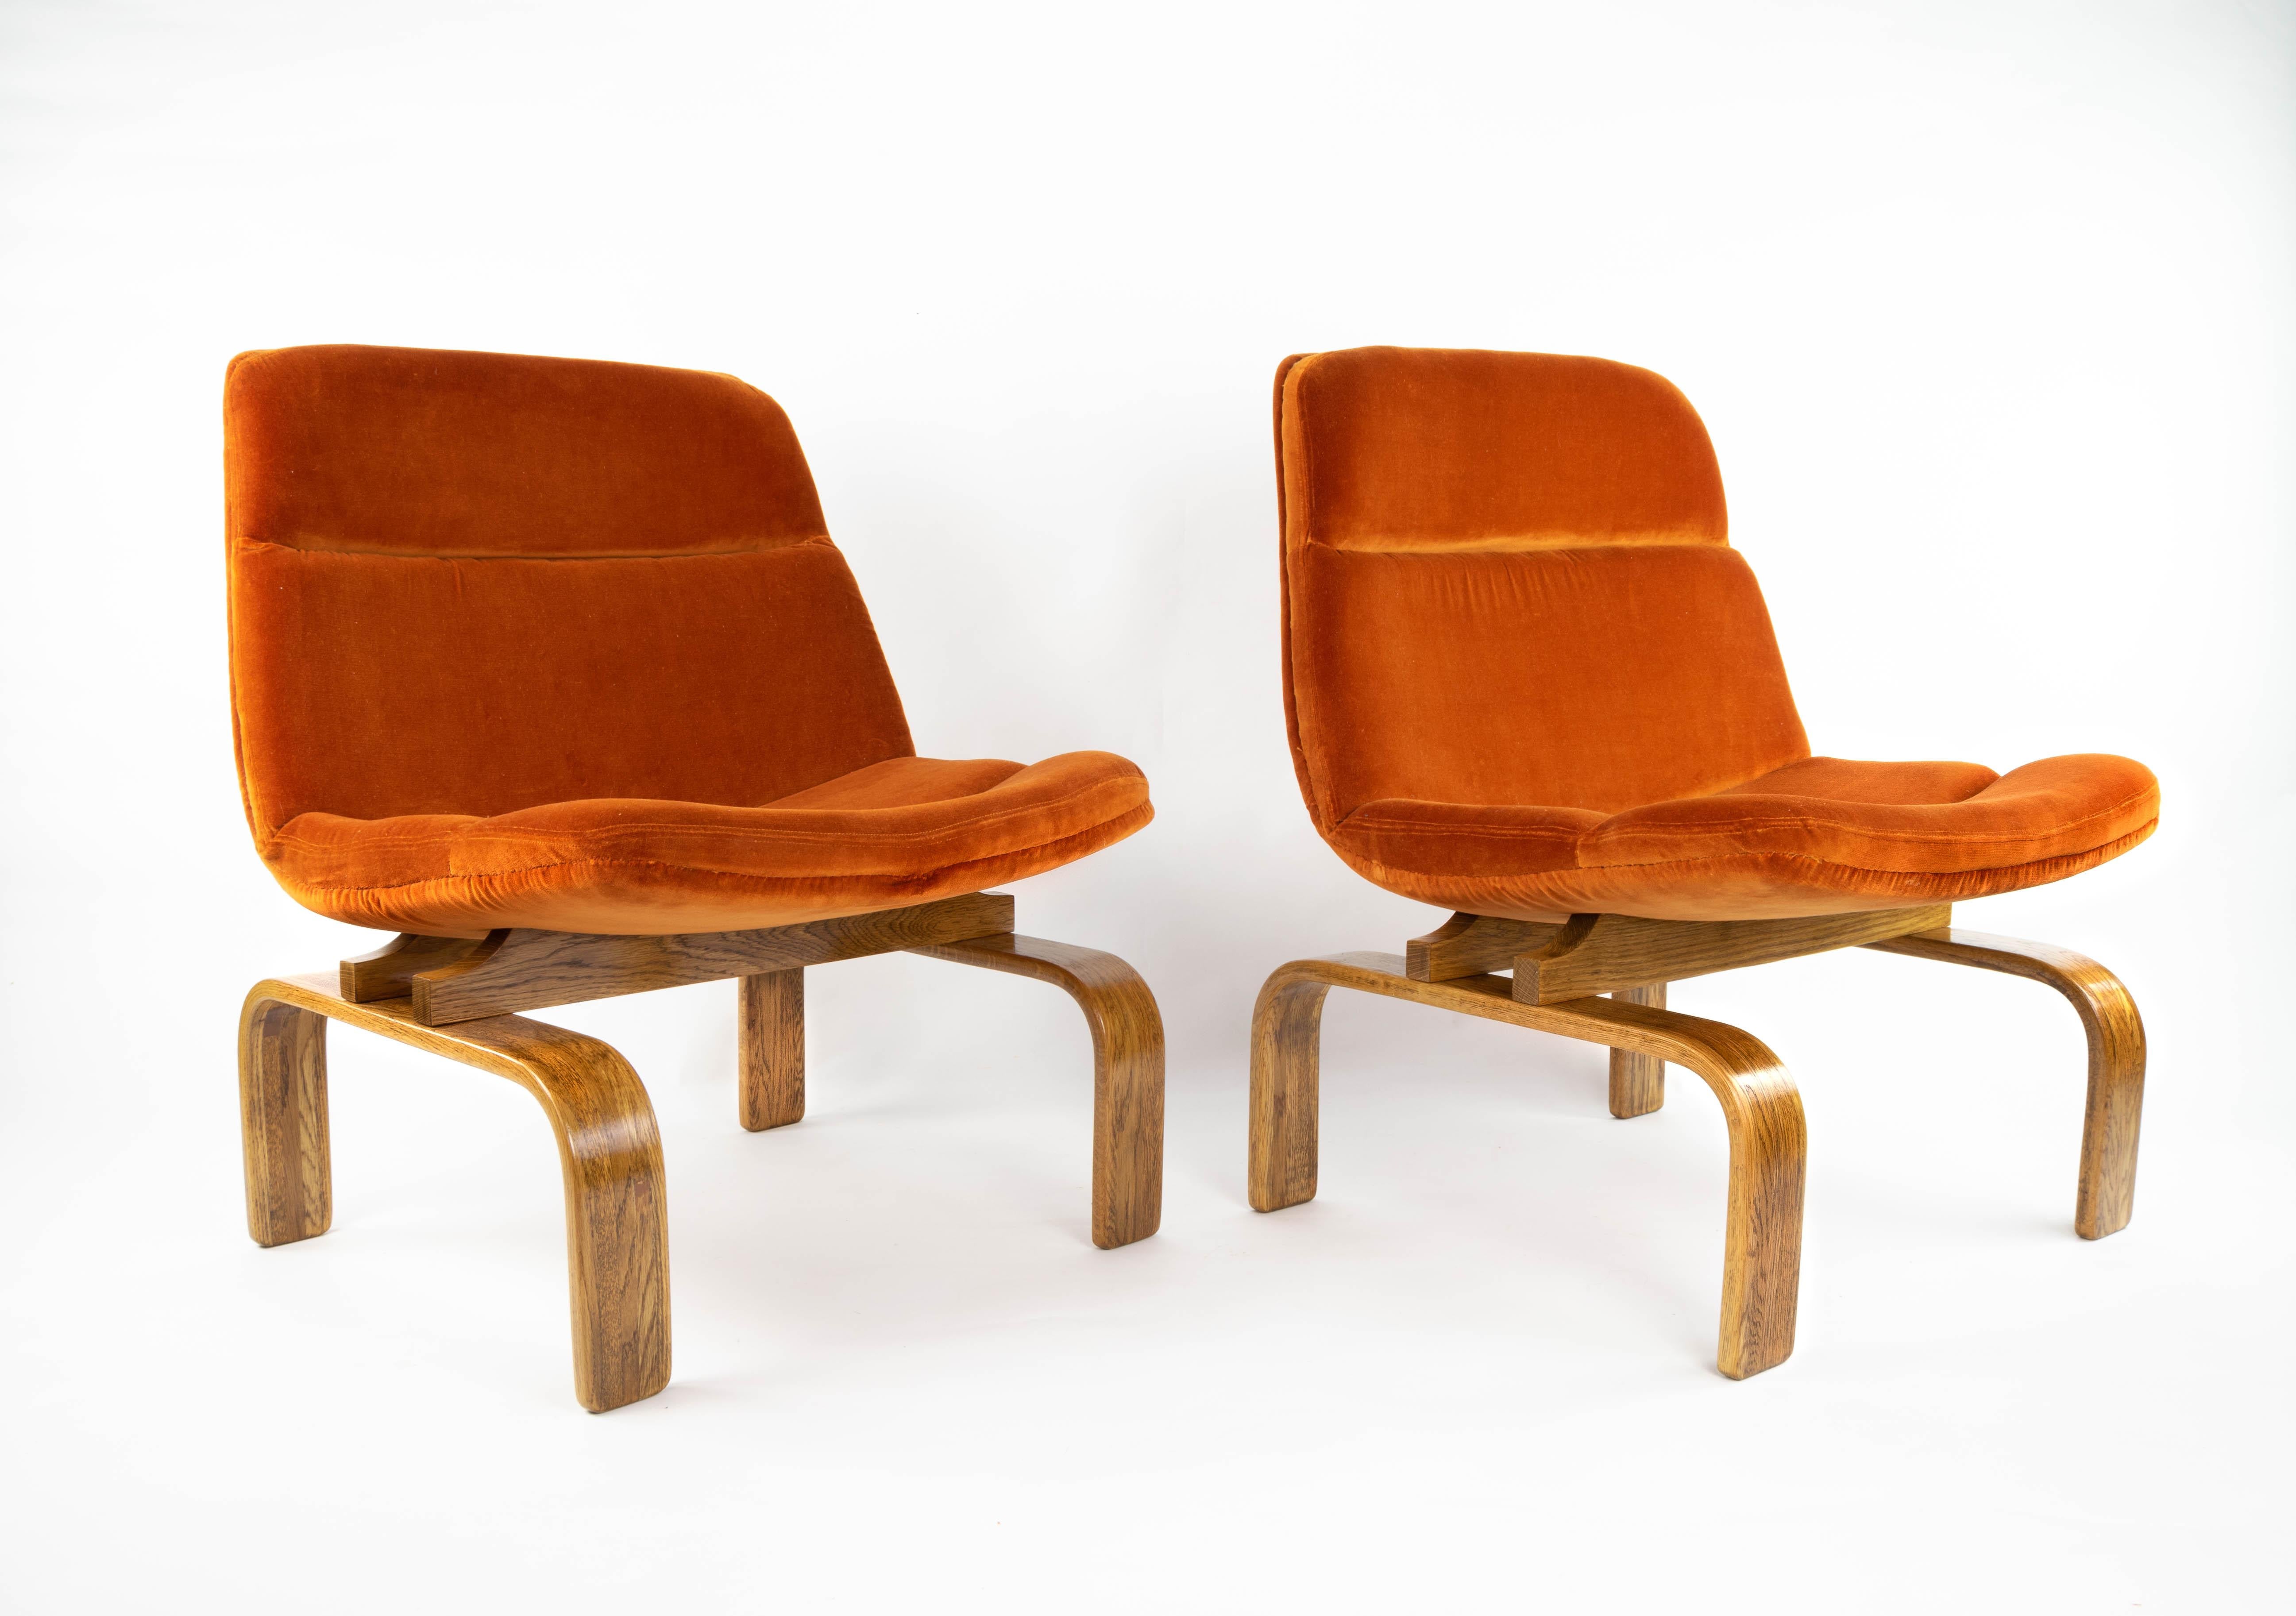 Pair of longechairs of the AG Barcelona firm. Made of fiberglass body, padded and upholstered in orange cotton velvet and structure in steam-curved oak.